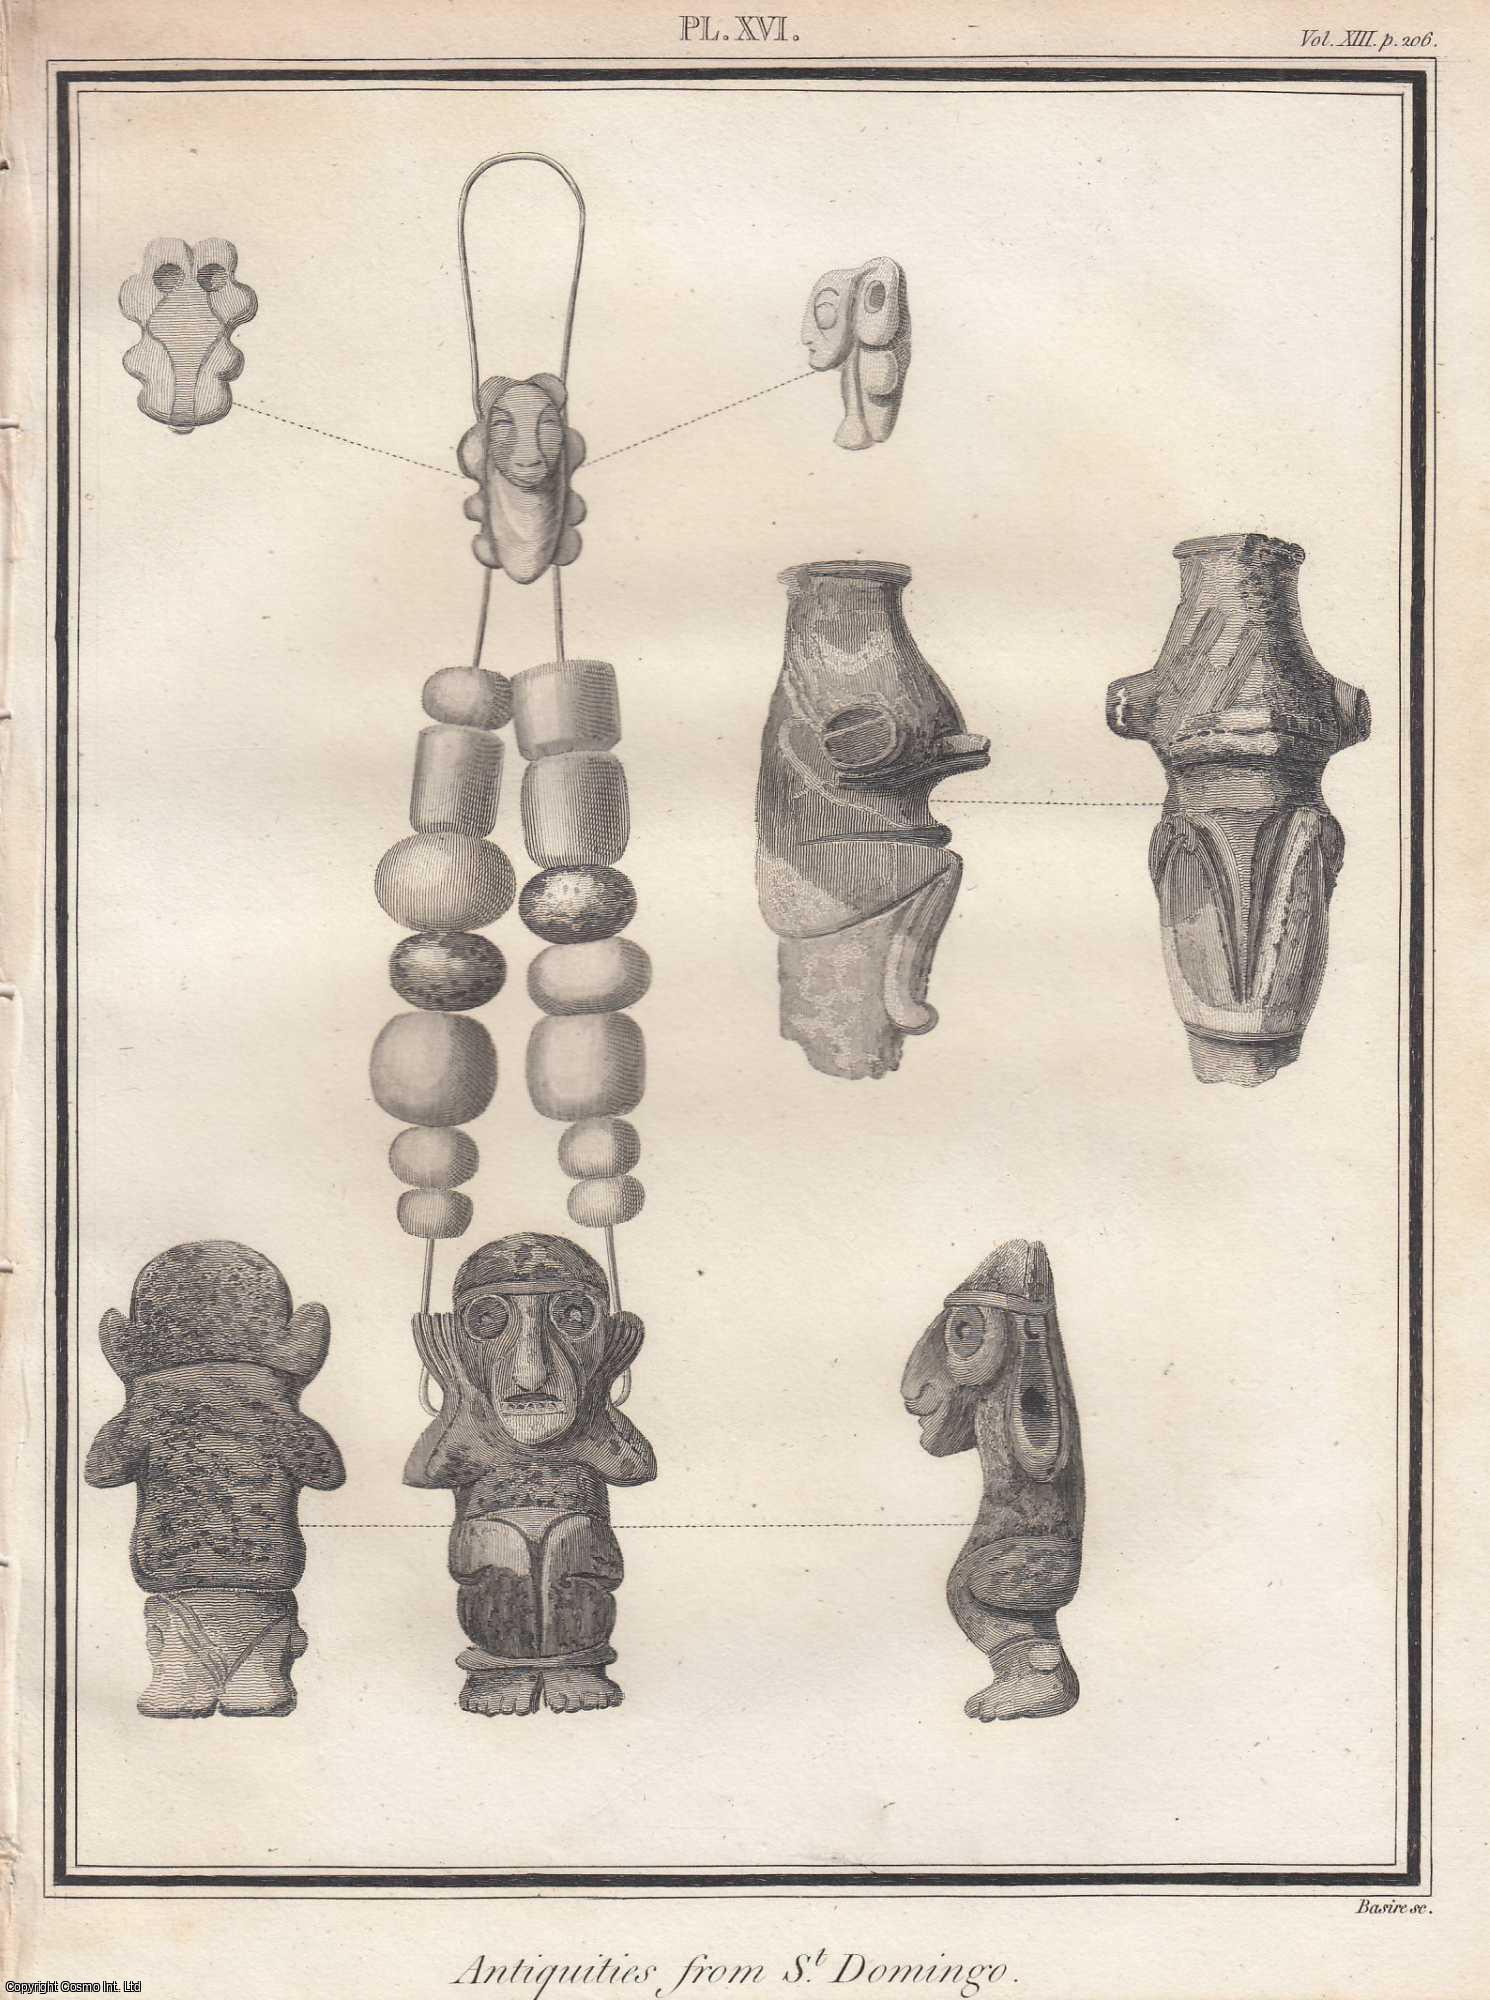 No Author Stated - Antiquities from St. Domingo. 1800. A single page print, 8 x 11 inches. Published by Archaeologia, or Miscellaneous Tracts relating to Antiquity. 1800.